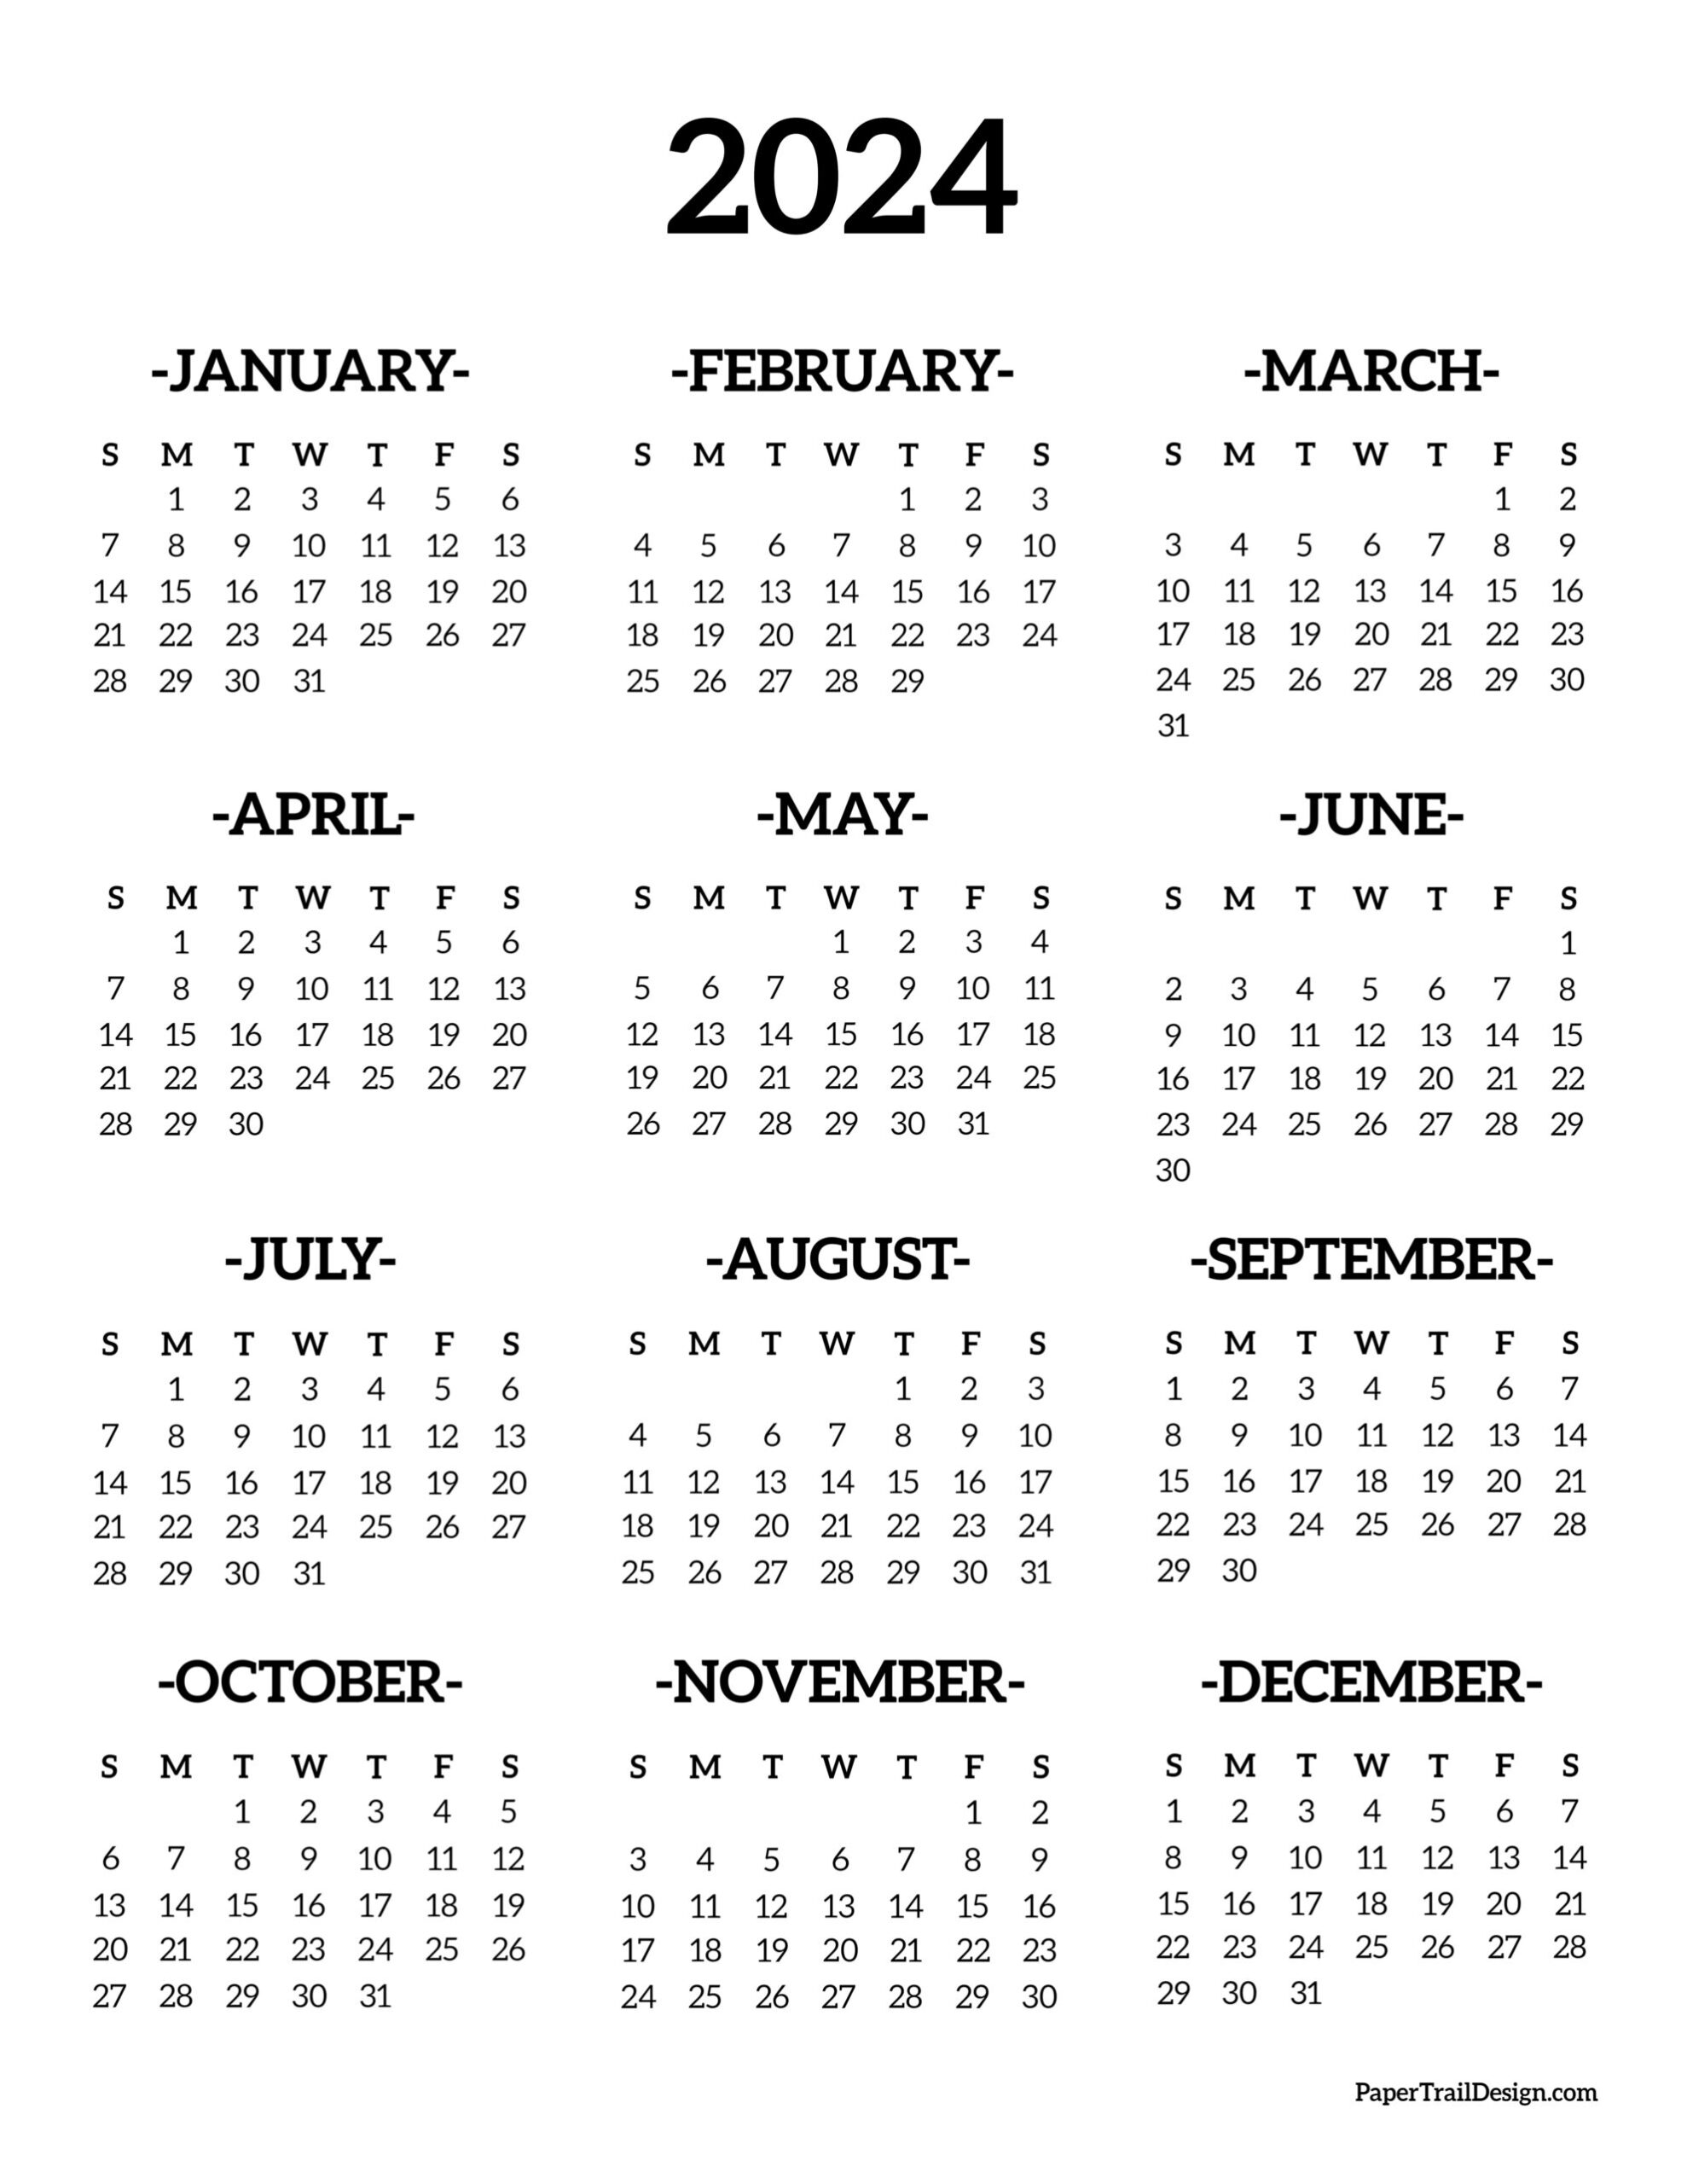 Calendar 2024 Printable One Page - Paper Trail Design for Printable Yearly Calendar For 2024